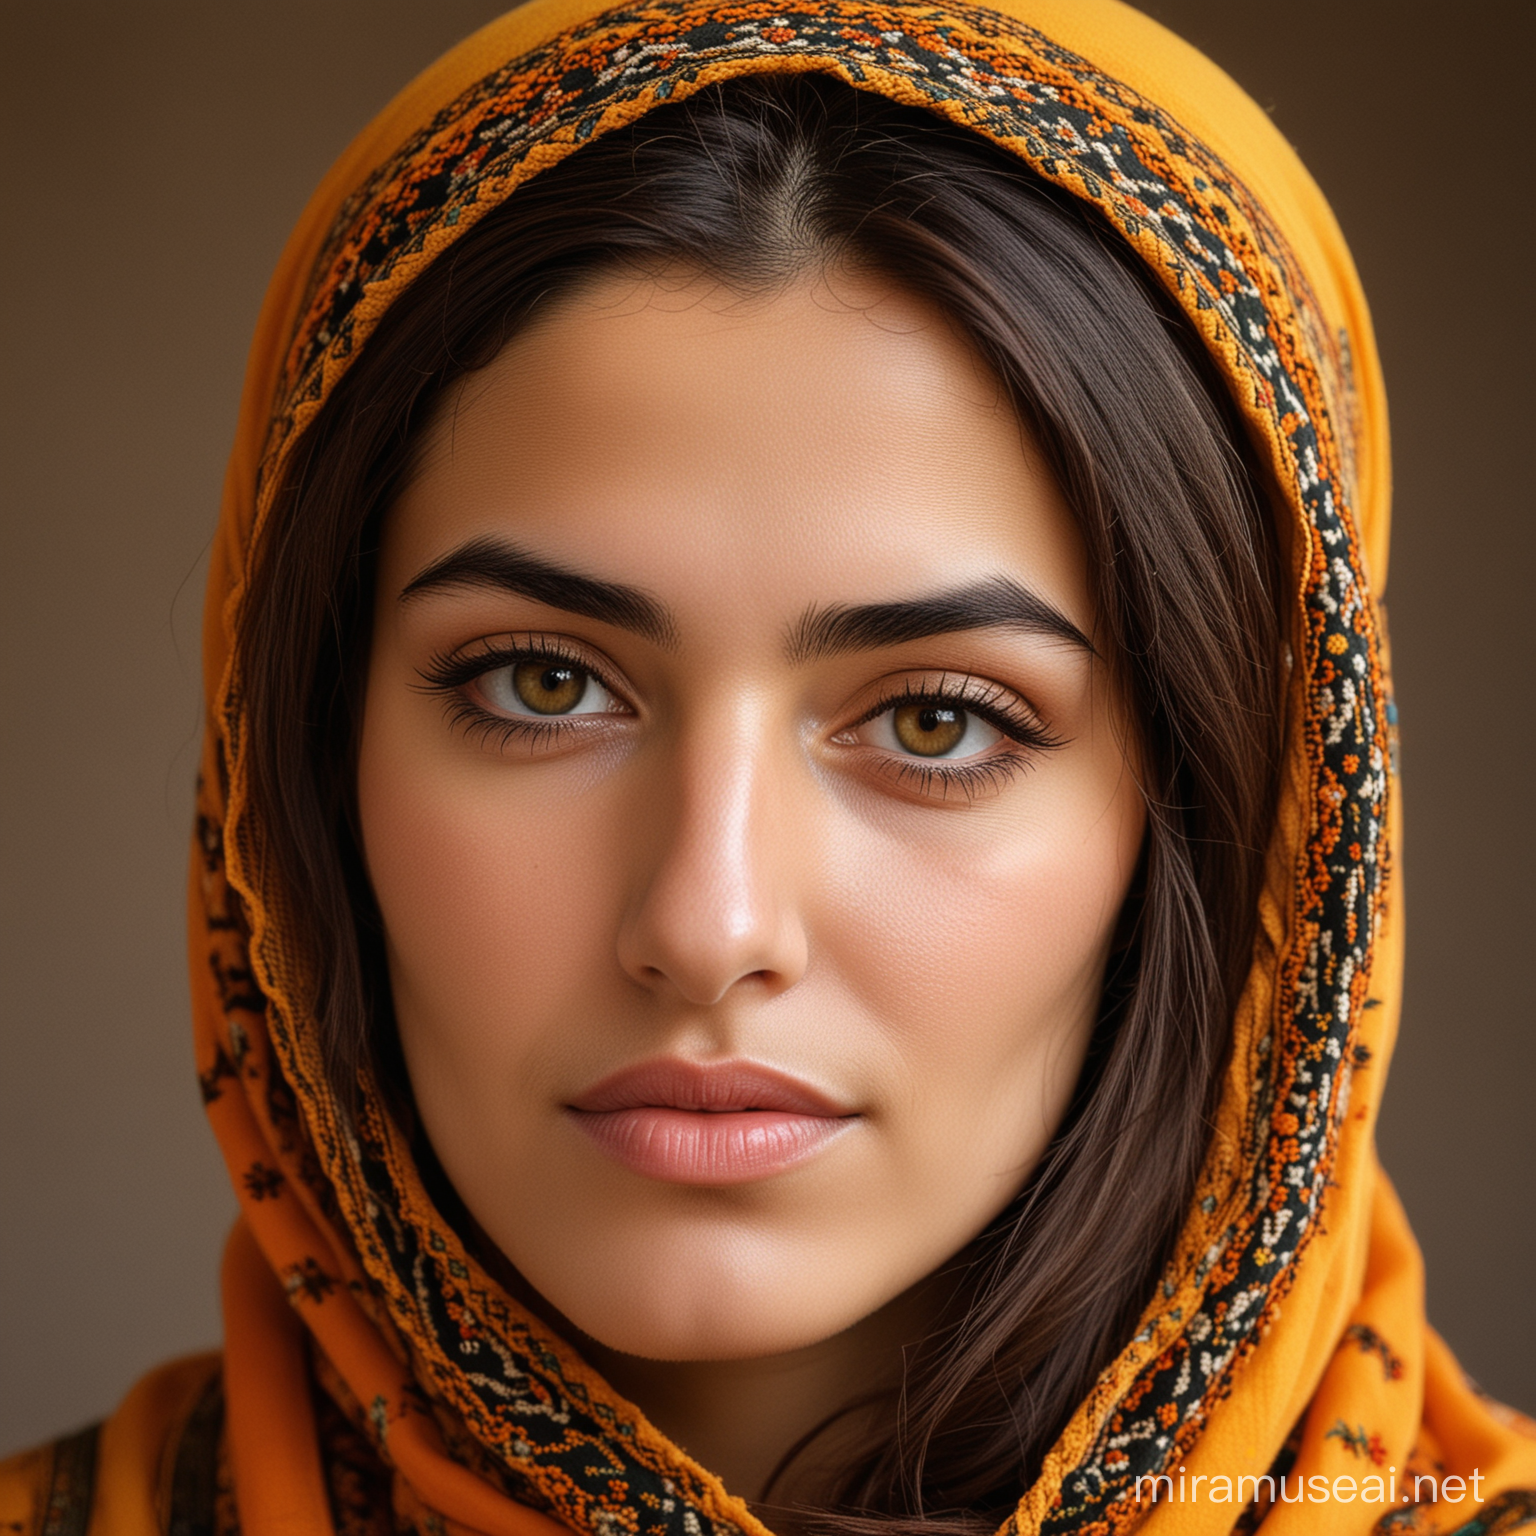 The face of an attractive woman of the Bakhtiari tribe from the Iran Zameen tribe for the profile of the Bakhtiari women's collection with attractive yellow and warm orange colors